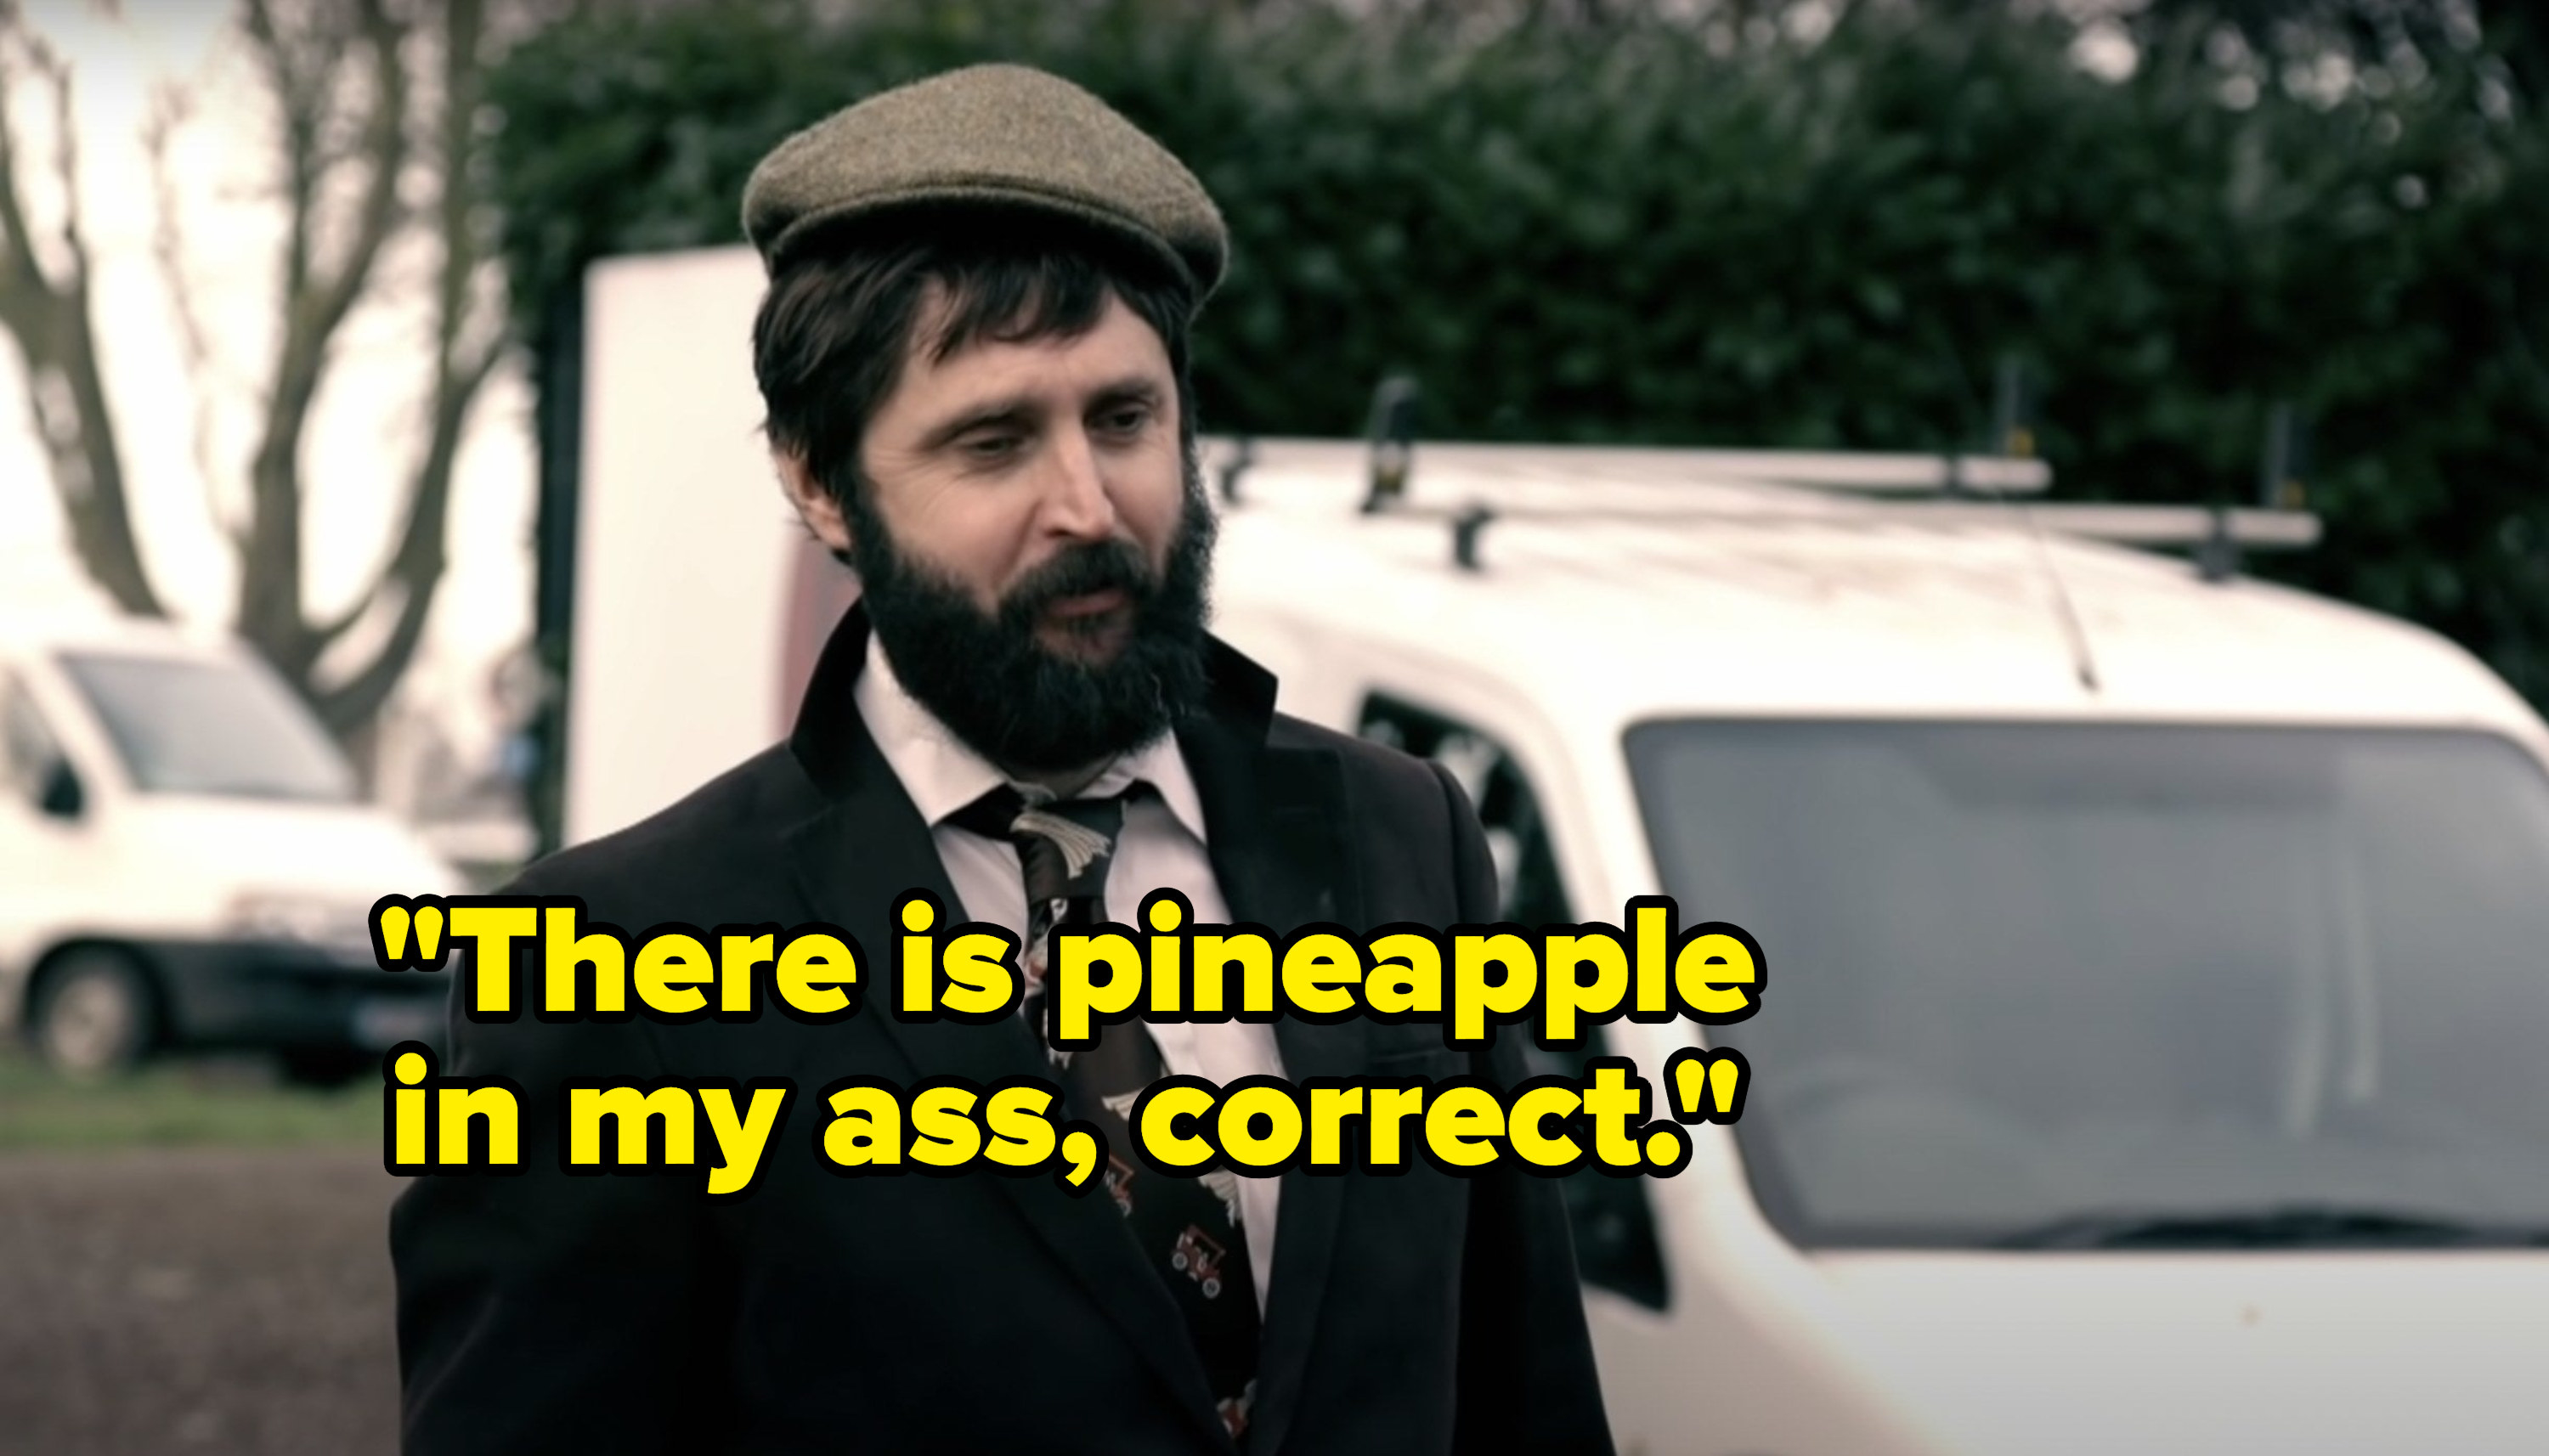 Joe Wilkinson says, There is pineapple in my ass, correct